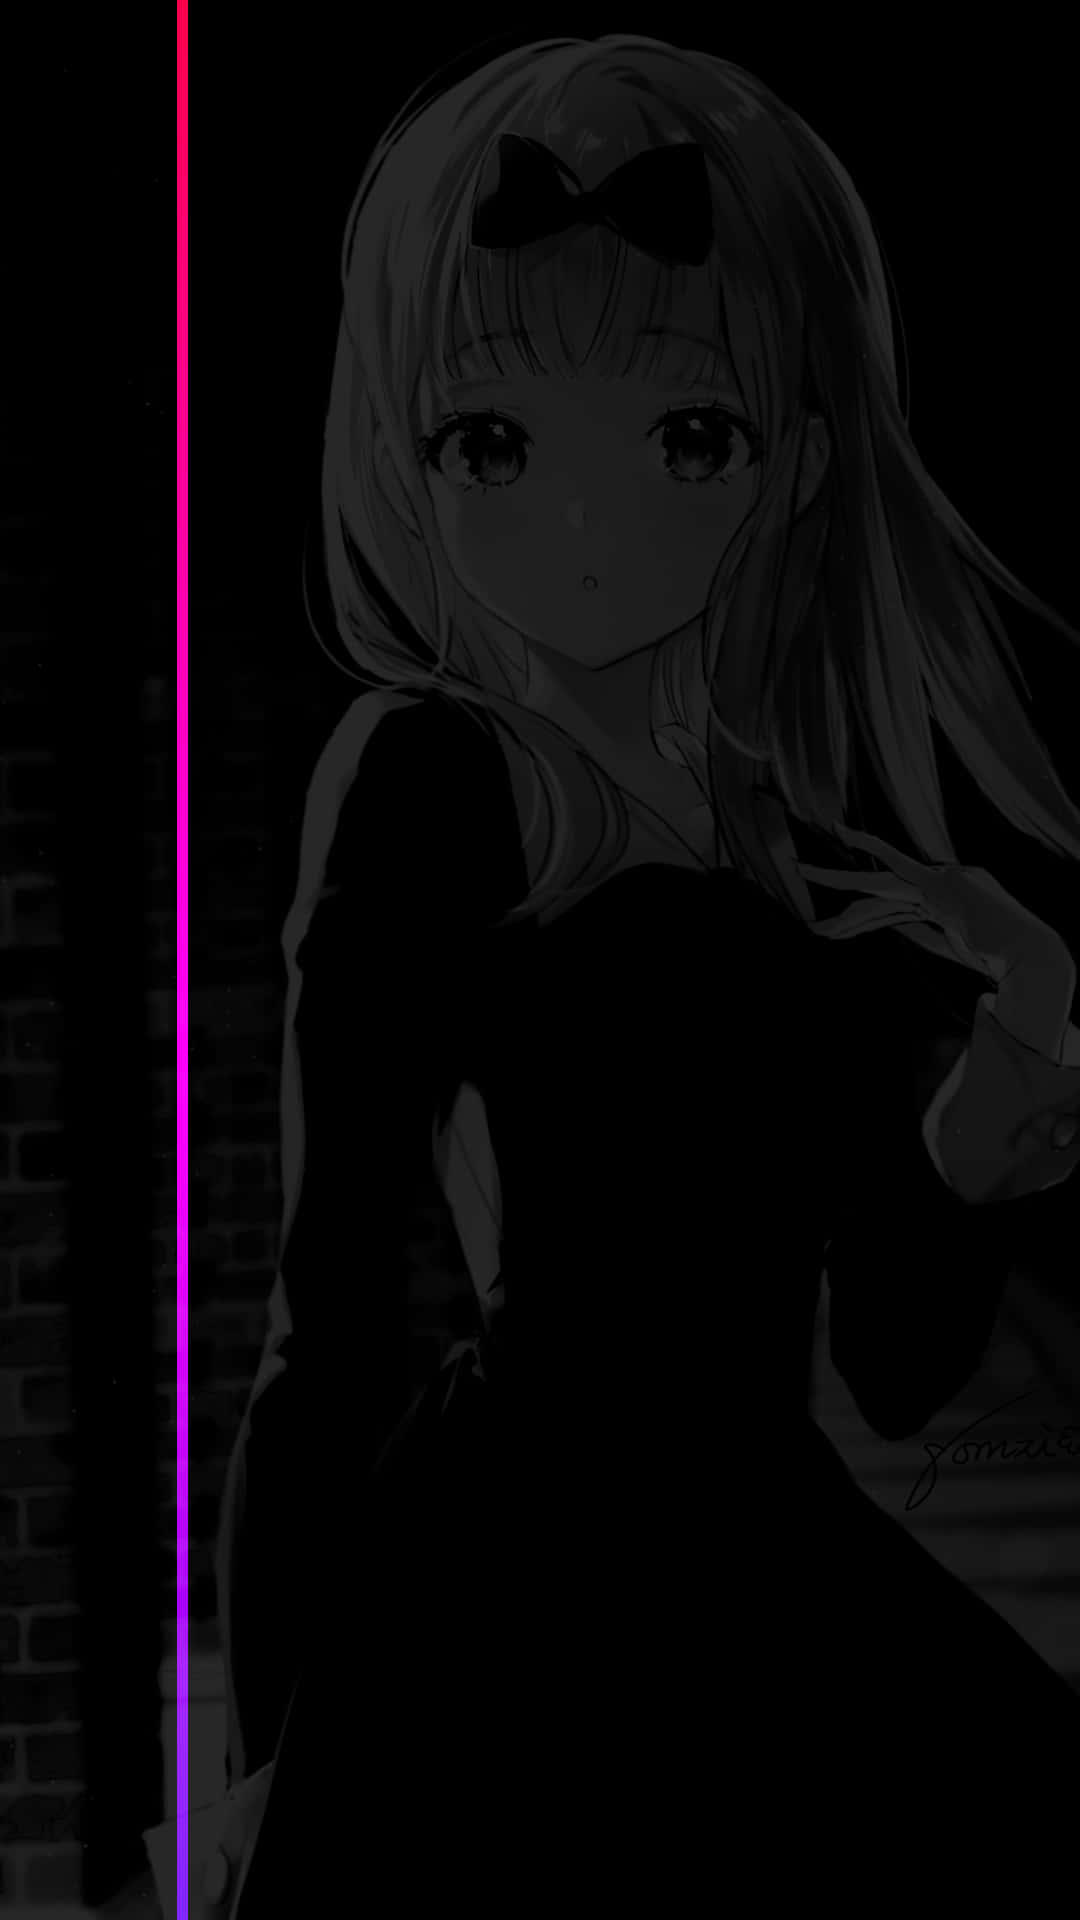 A dark anime girl with mysterious eyes Wallpaper